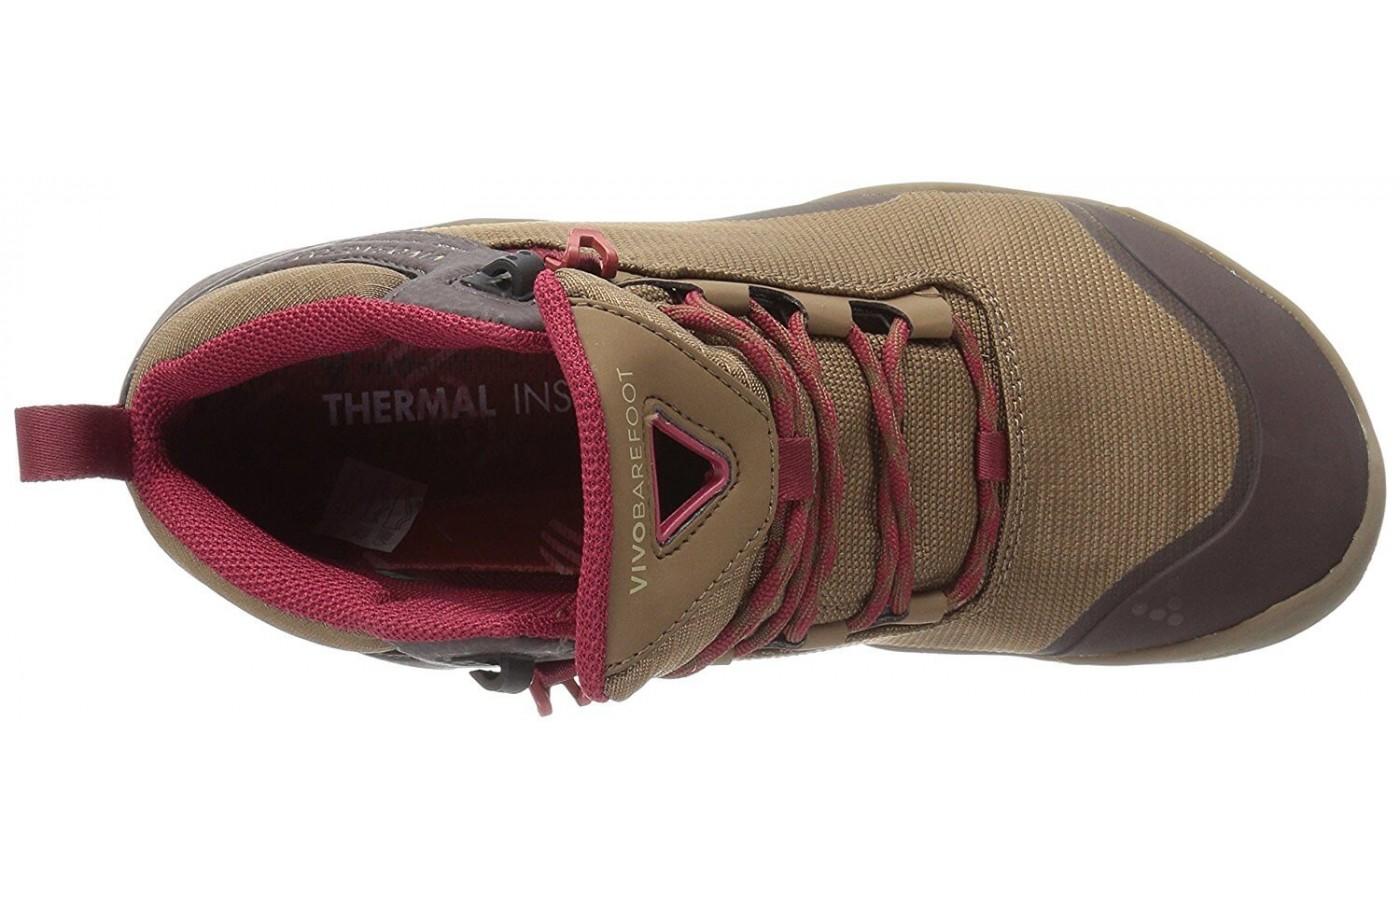 The thermal interior helps regulate the temperature of the shoe. 